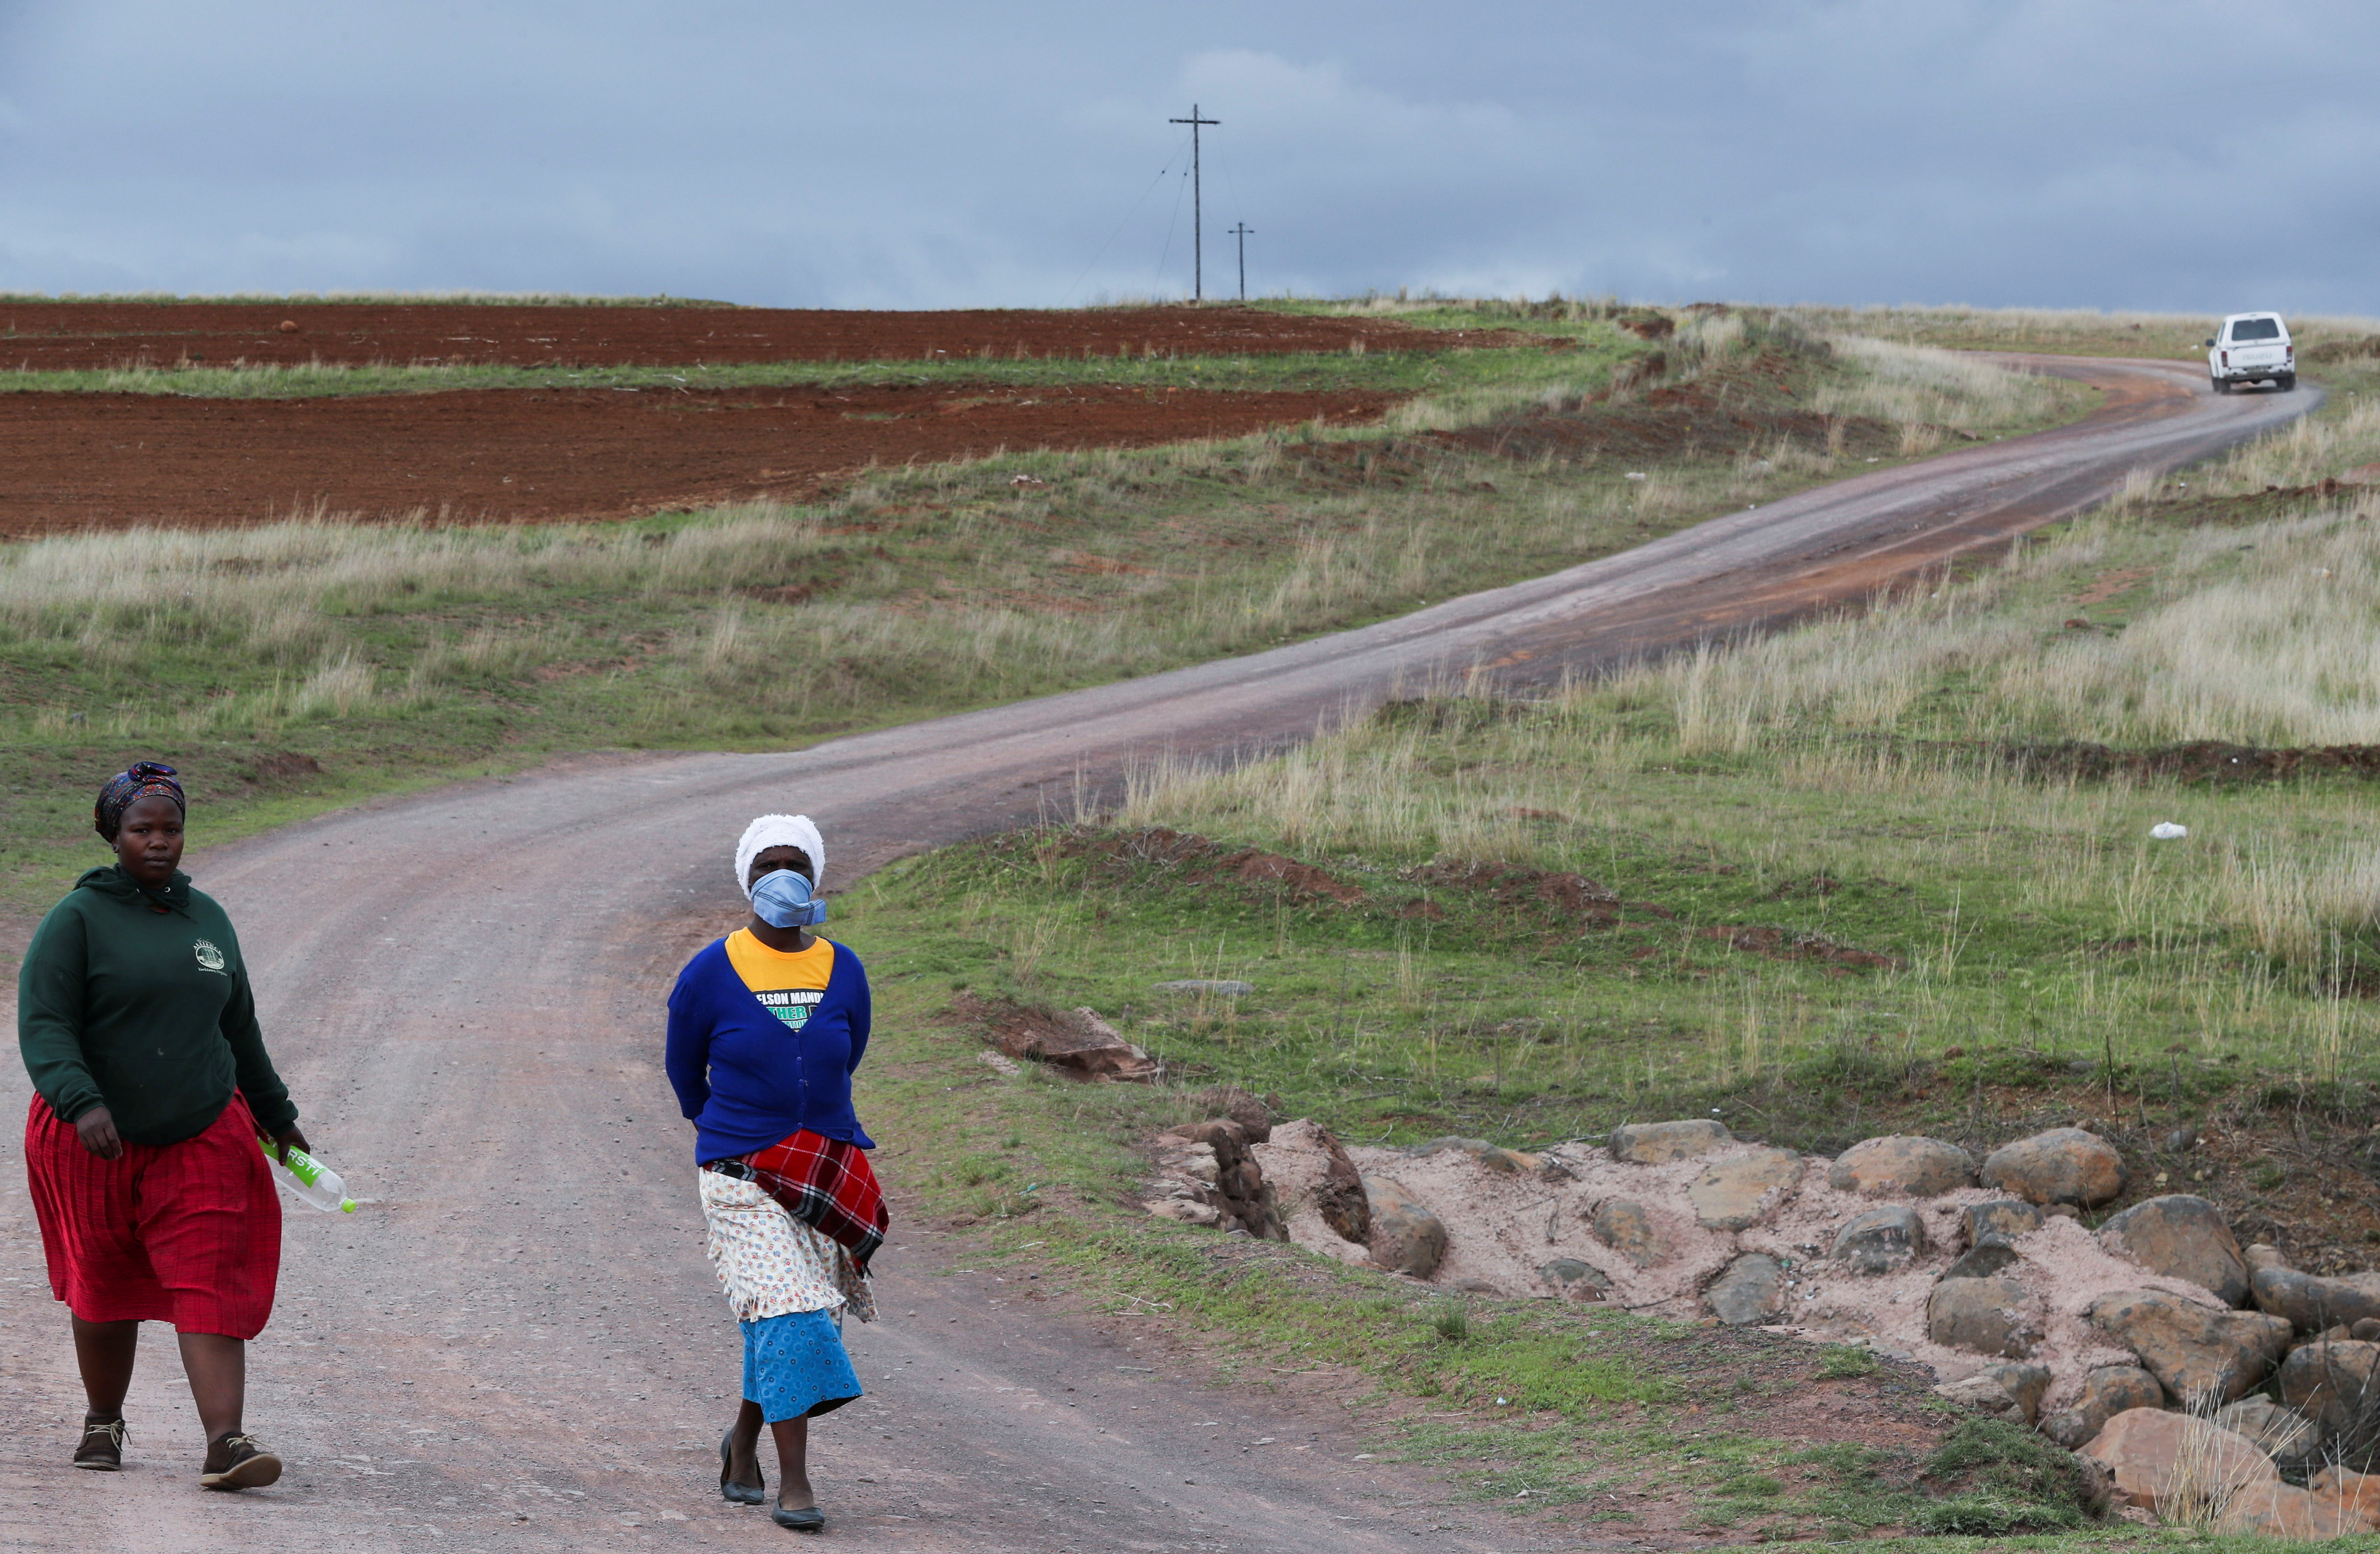 Women walk on a dirt road while using a handkerchief to cover their nose, as the new coronavirus variant, Omicron spreads, in Qumanco village in the Eastern Cape province of South Africa, November 30, 2021. REUTERS/Siphiwe Sibeko